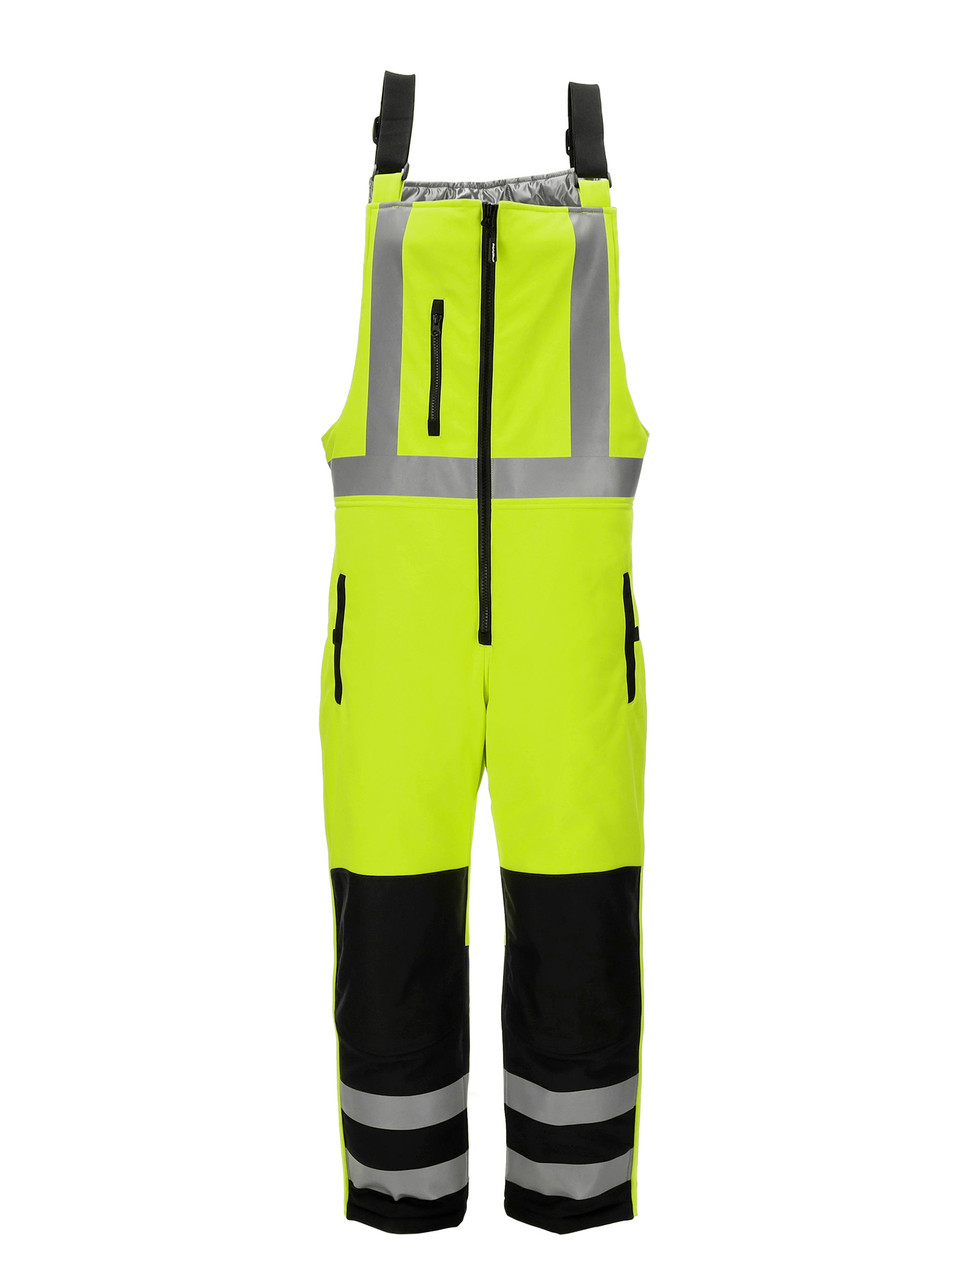 RefrigiWear HiVis Insulated Softshell High Bib Overalls | Lime/Black | Fit: Big & Tall | 100% Polyester | S